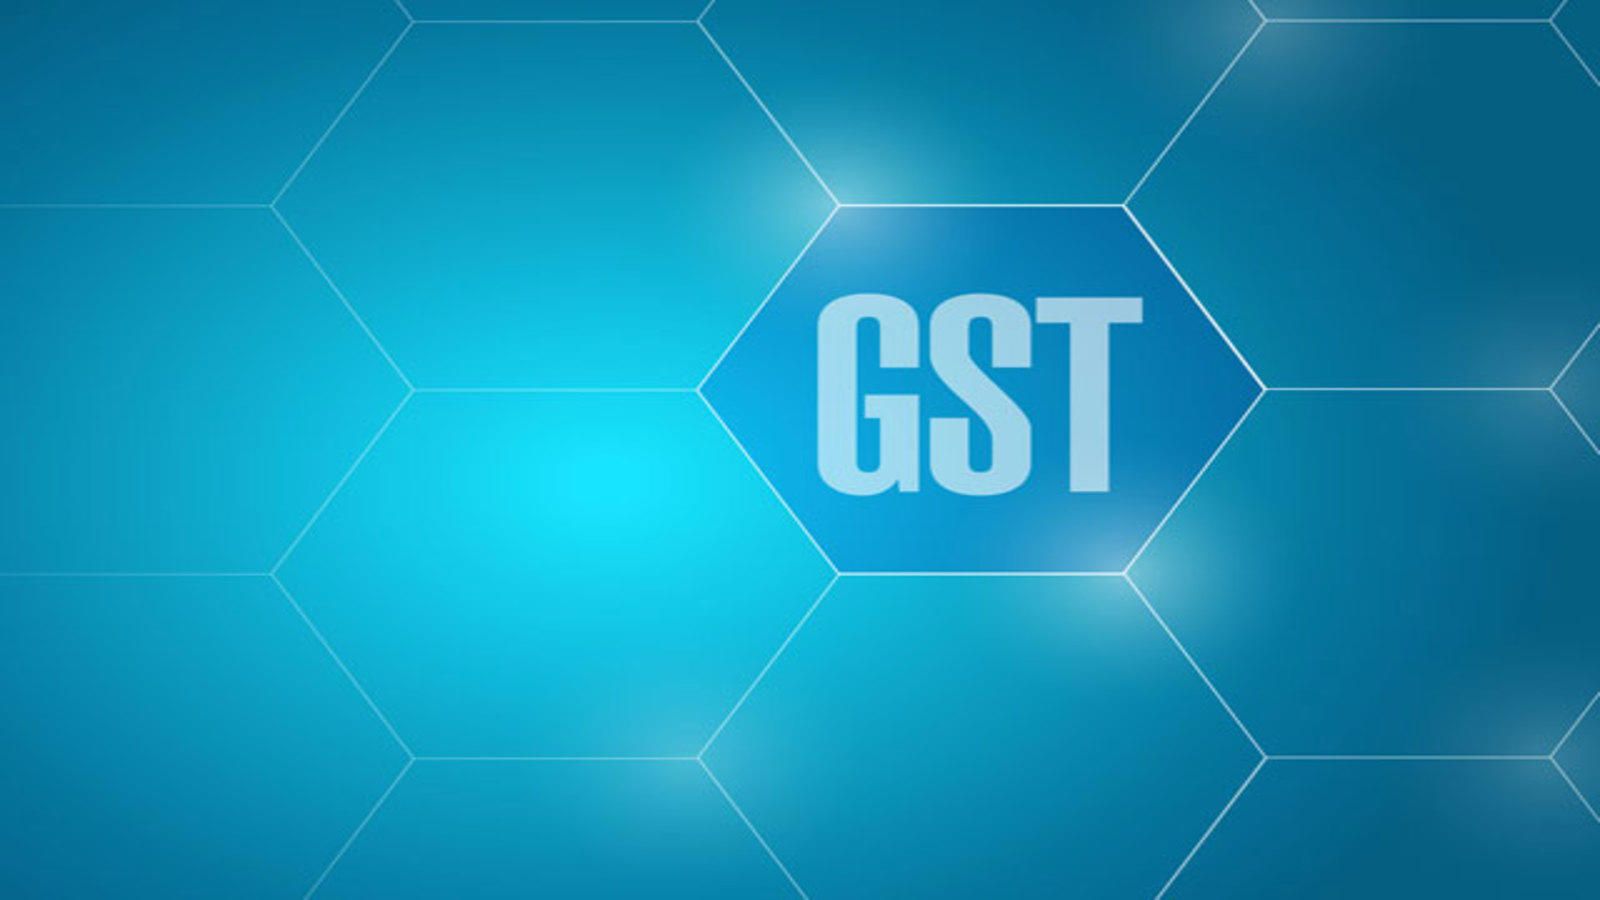 gst: Taxpayers can explain discrepancy in their GST returns on GST portal  before getting notice - The Economic Times